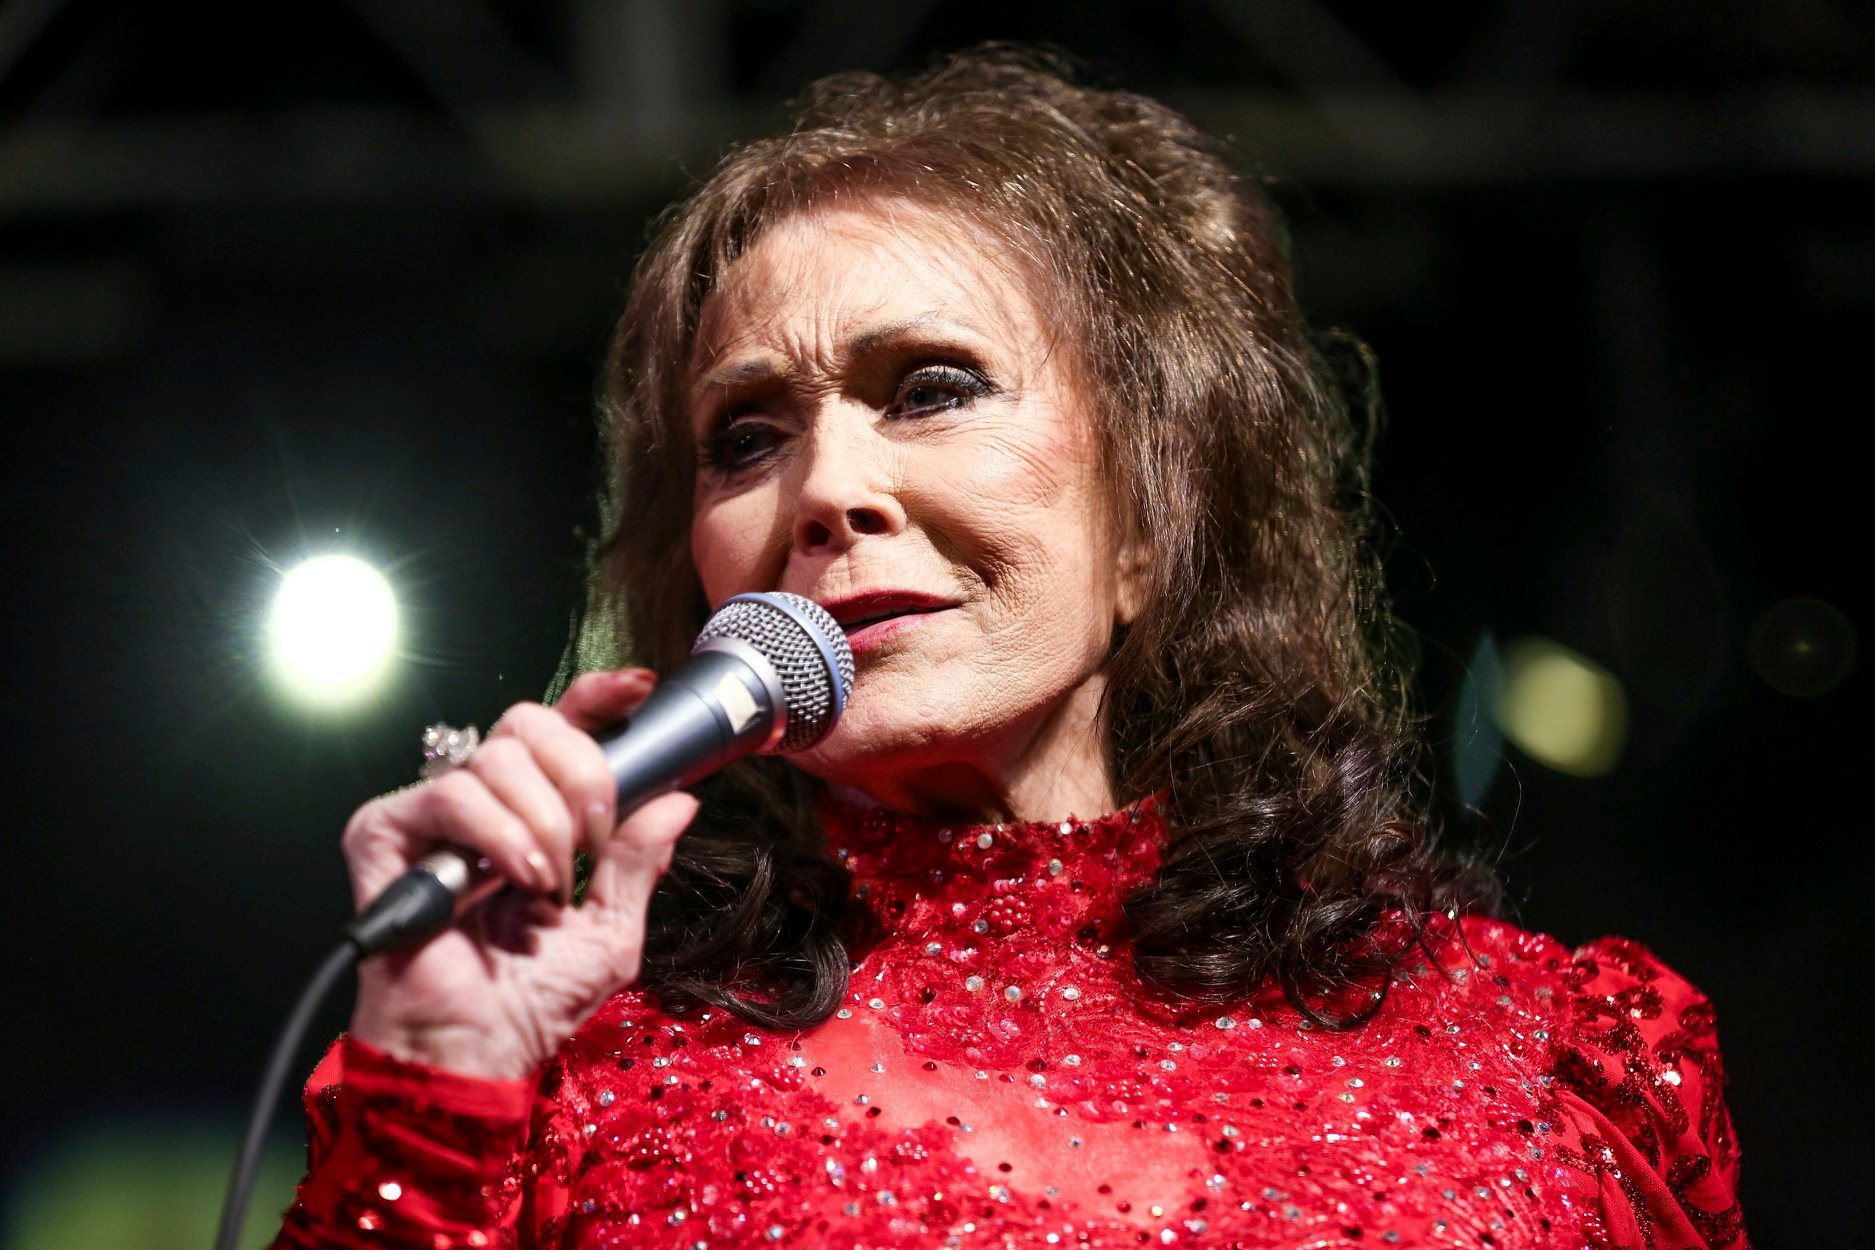              Country singer Loretta Lynn is 89 years young.  